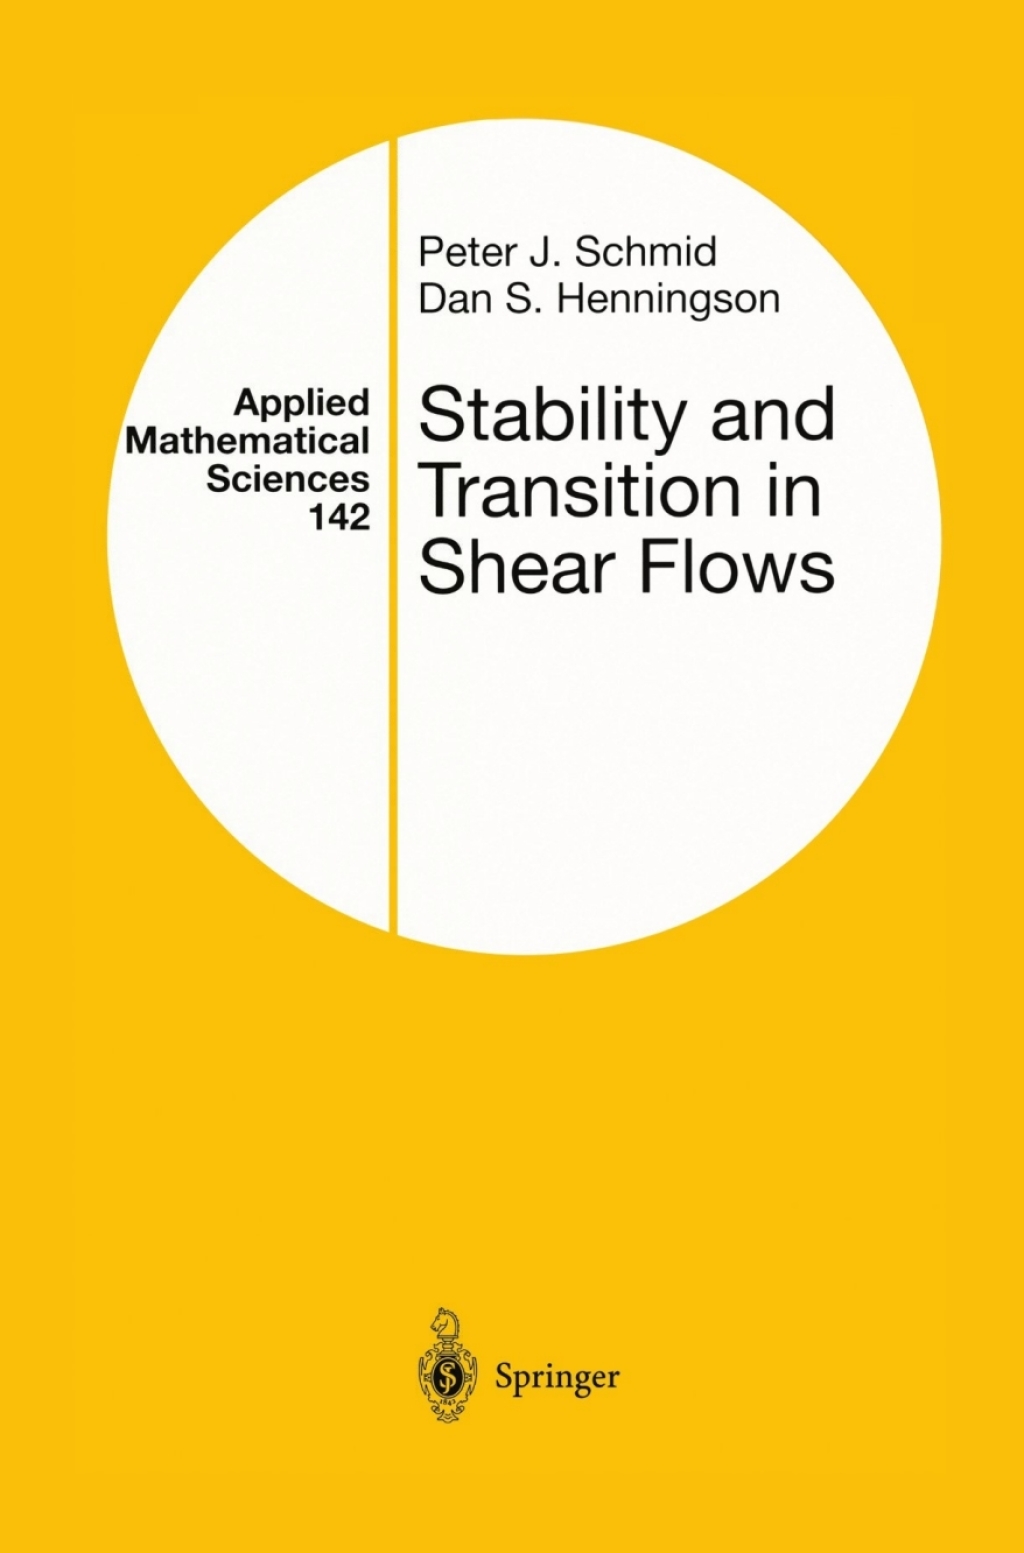 Stability and Transition in Shear Flows (eBook) - Peter J. Schmid; Dan S. Henningson